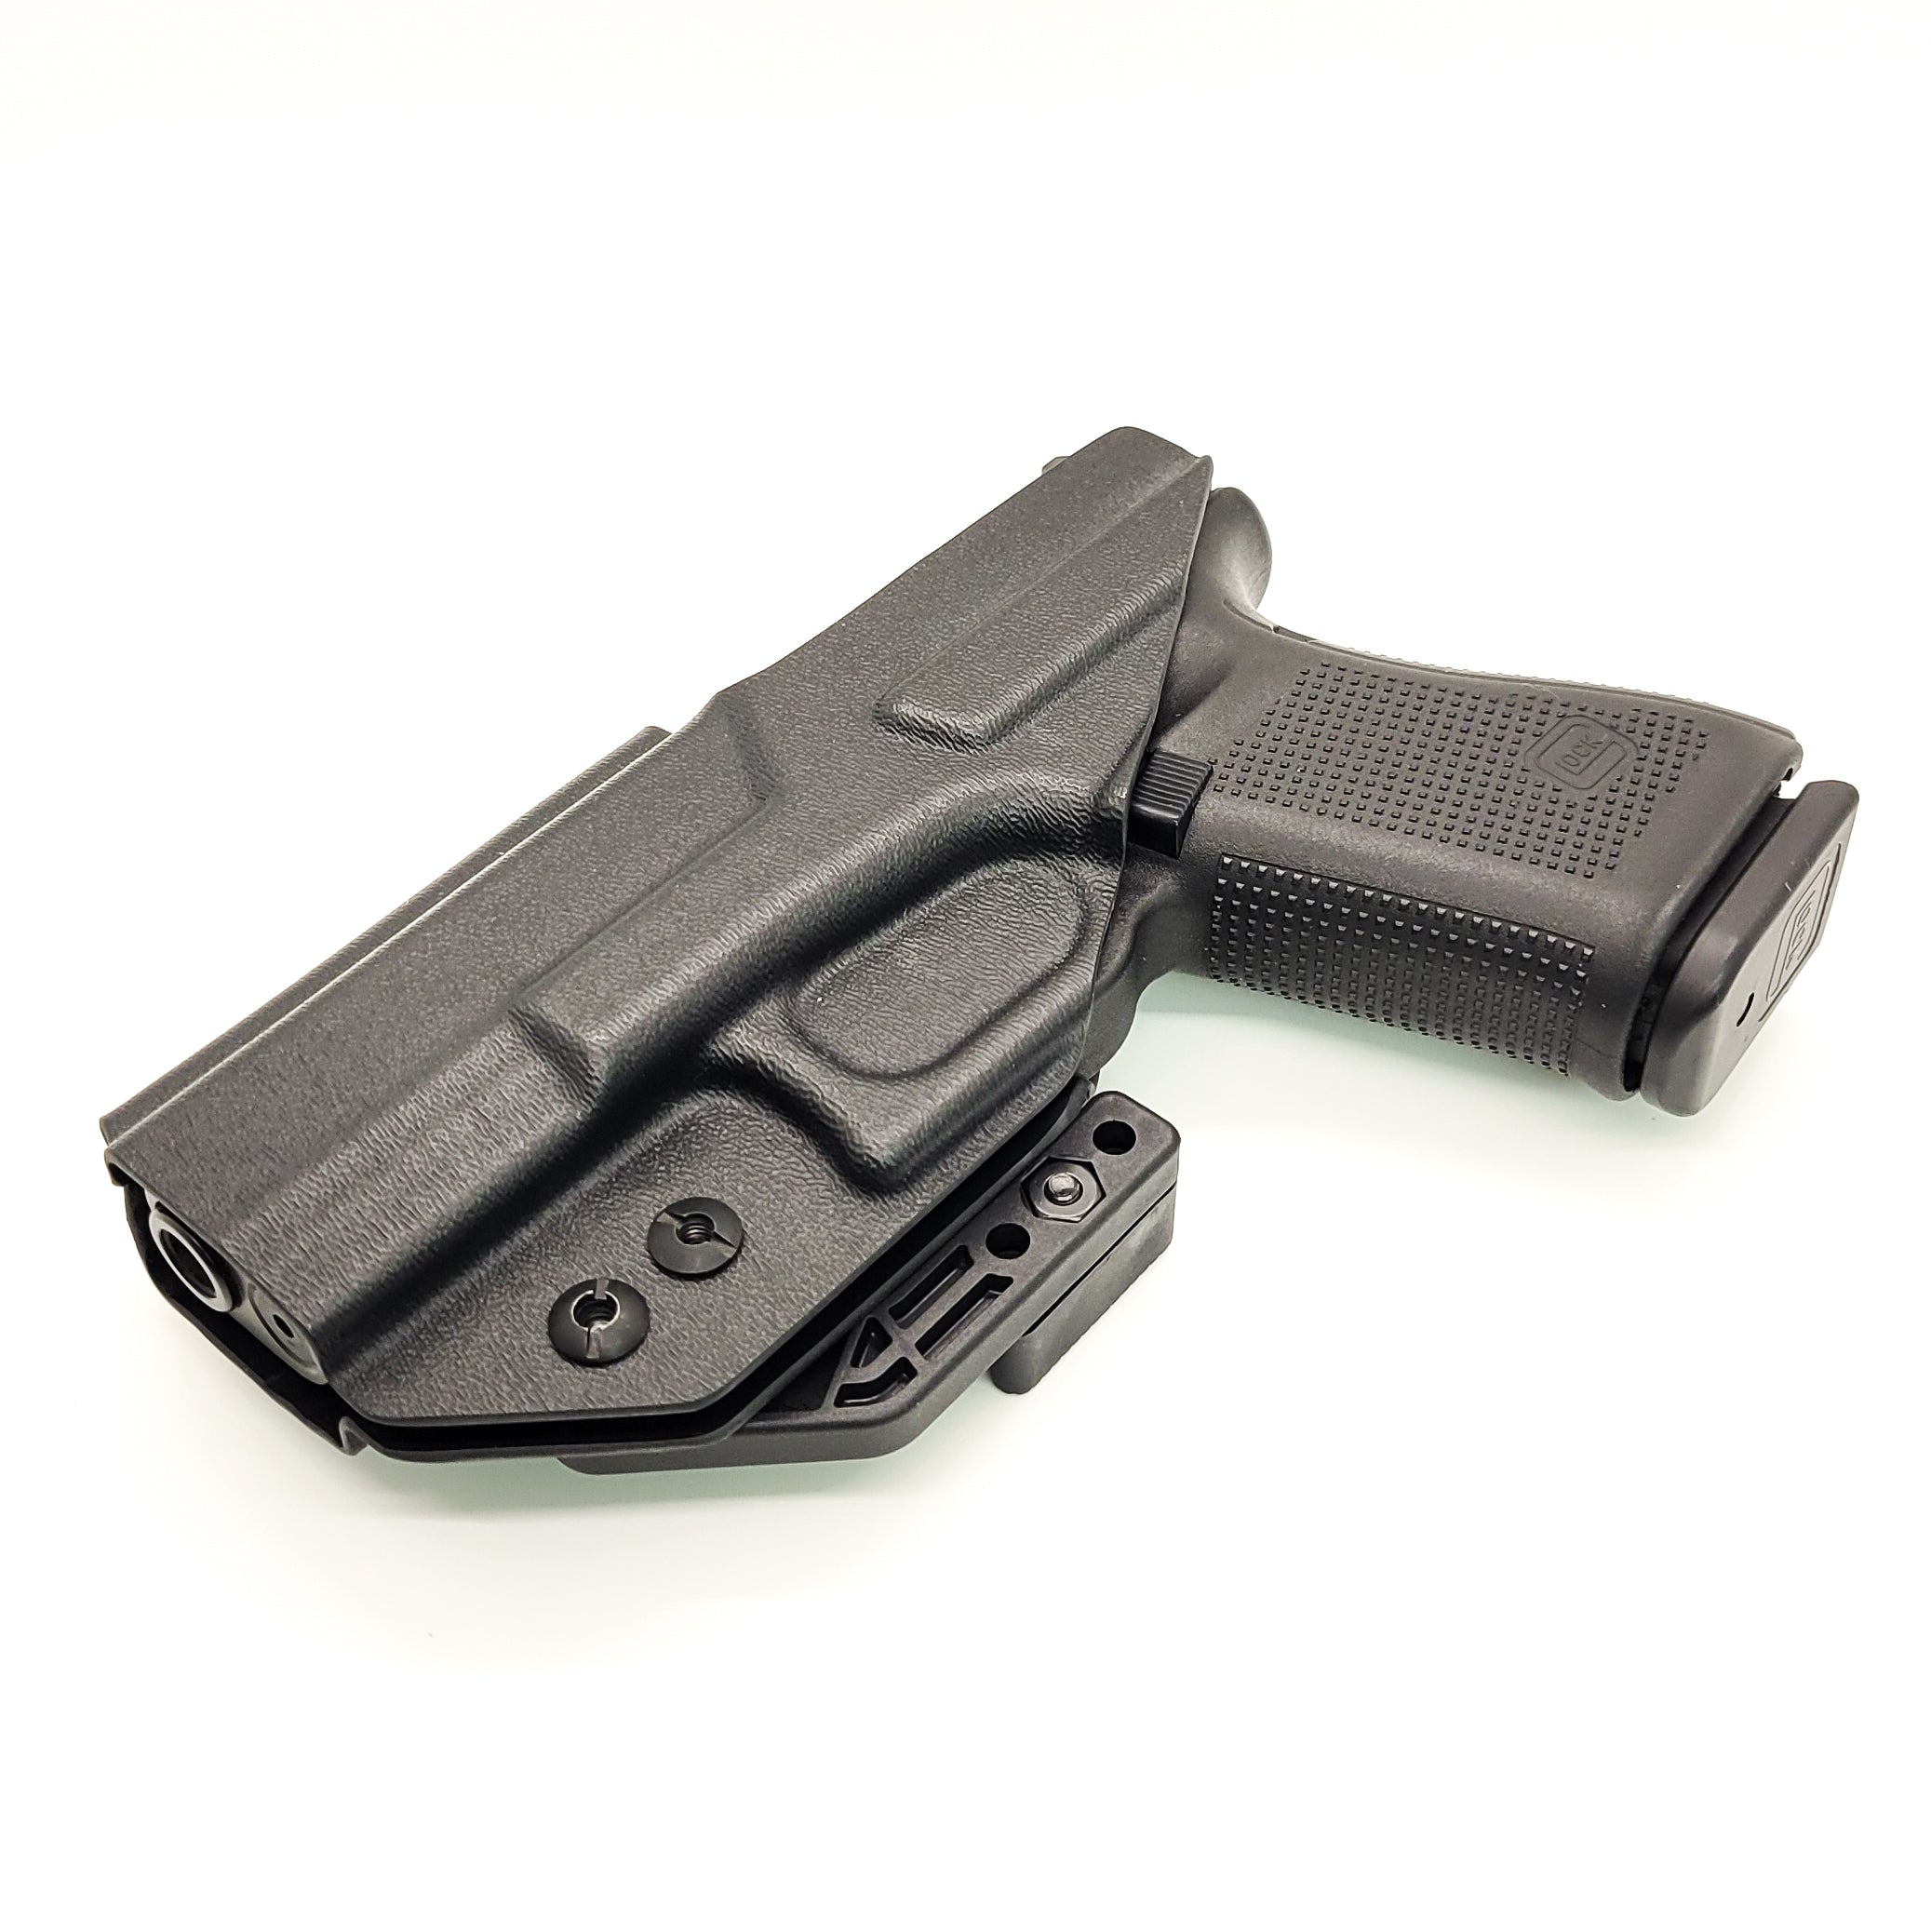 For the best Kydex Glock 19 IWB AIWB Inside Waistband Holster that is designed to fit the Glock 19, 23, 32, 19X, or 45 handguns, shop Four Brothers. Adjustable retention and cant. Confirmed to fit Generation 2, 3, 4, and 5 pistols. Proudly made in the USA by Veterans and Law Enforcement employees.